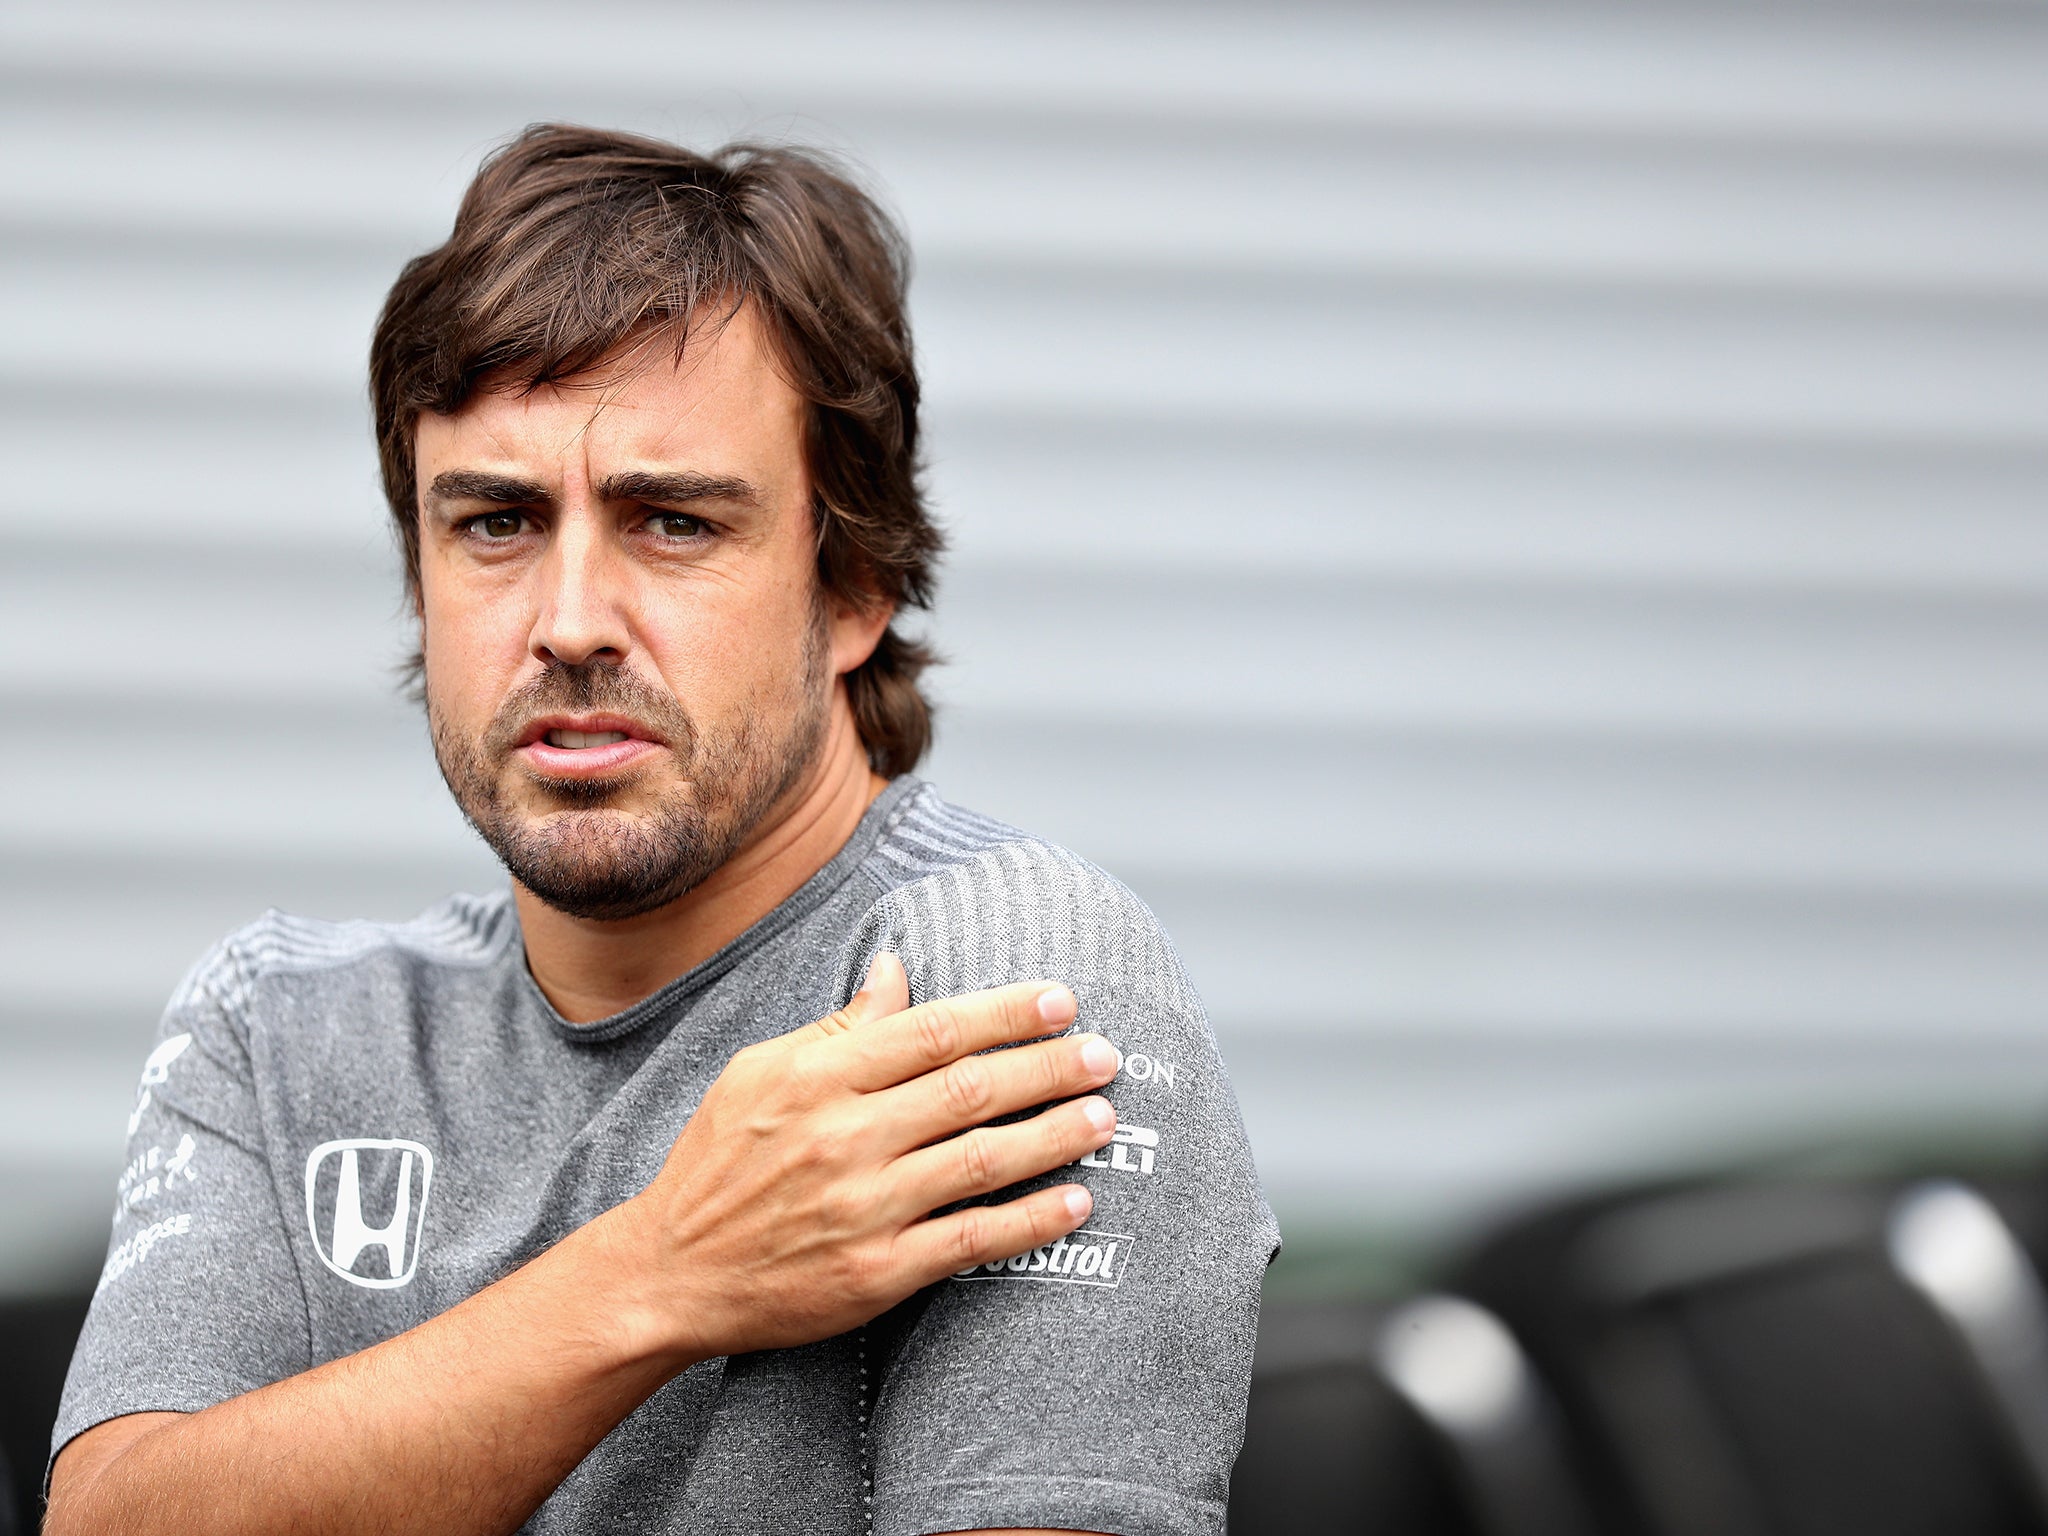 Fernando Alonso's claim that his McLaren had an 'engine problem' has been dismissed by Honda